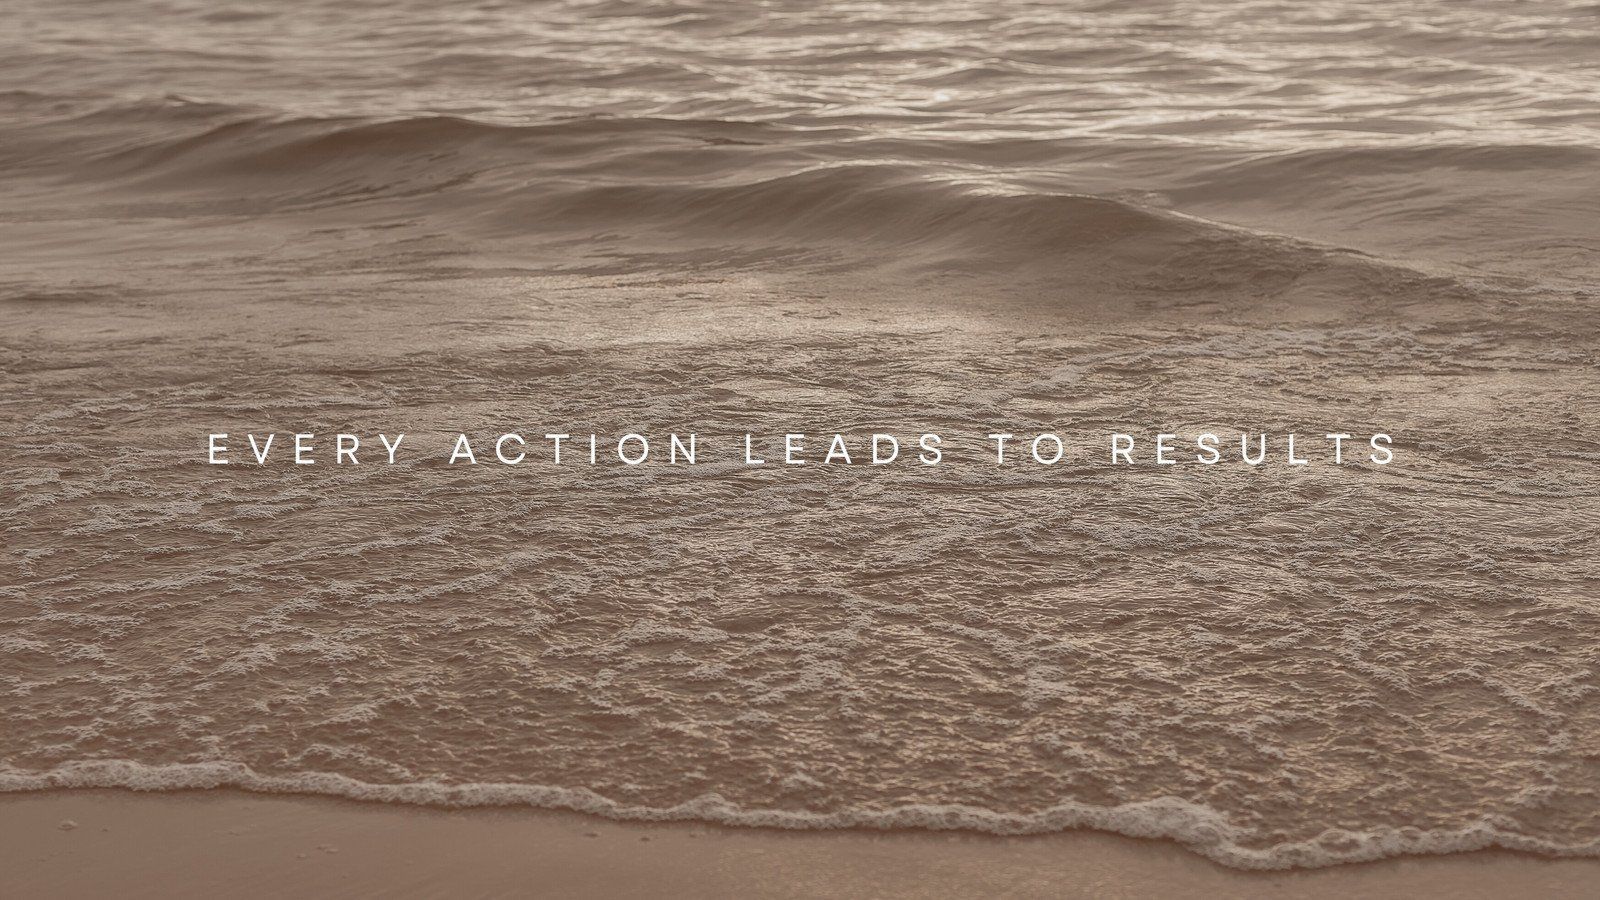 Every action leads to results. - Light brown, motivational, inspirational, coast